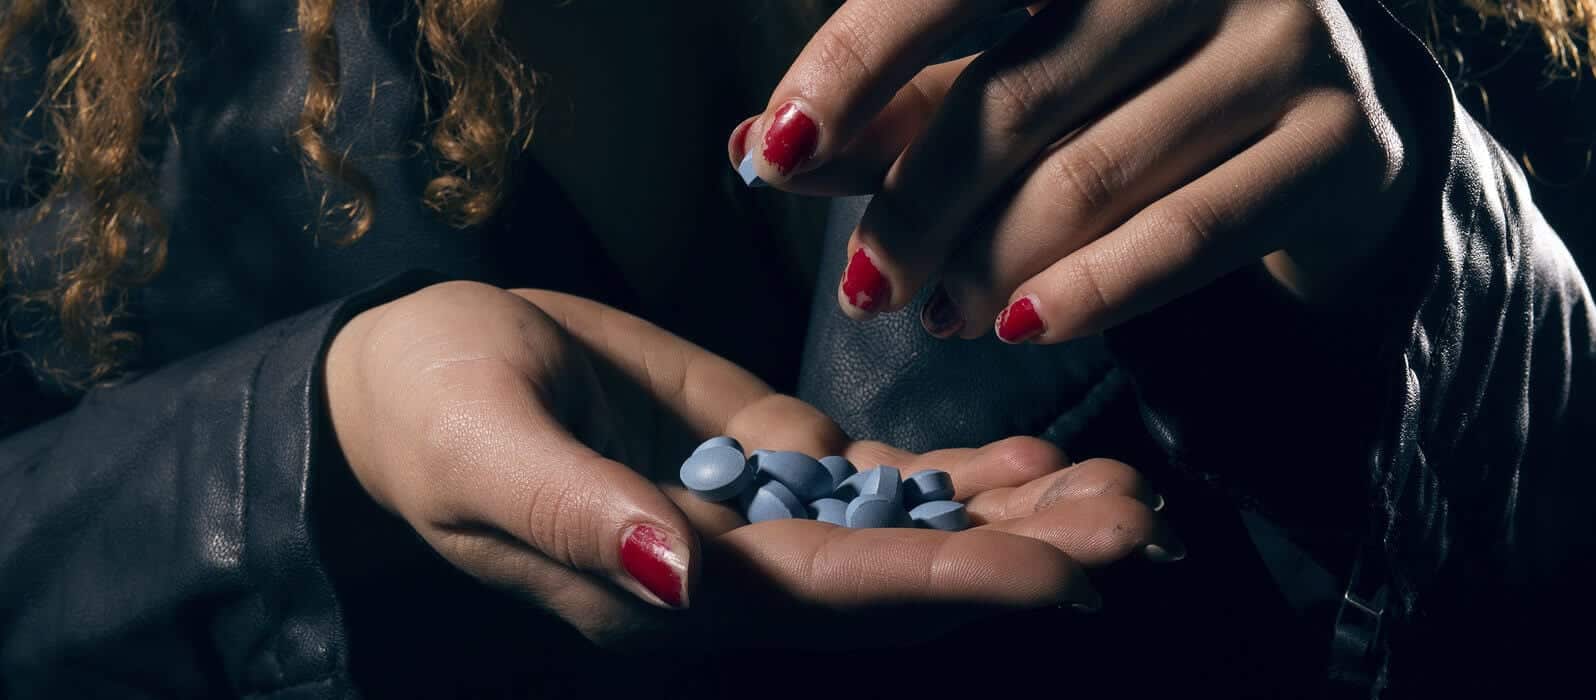 Xanax and Hydrocodone: A Dangerous Combination